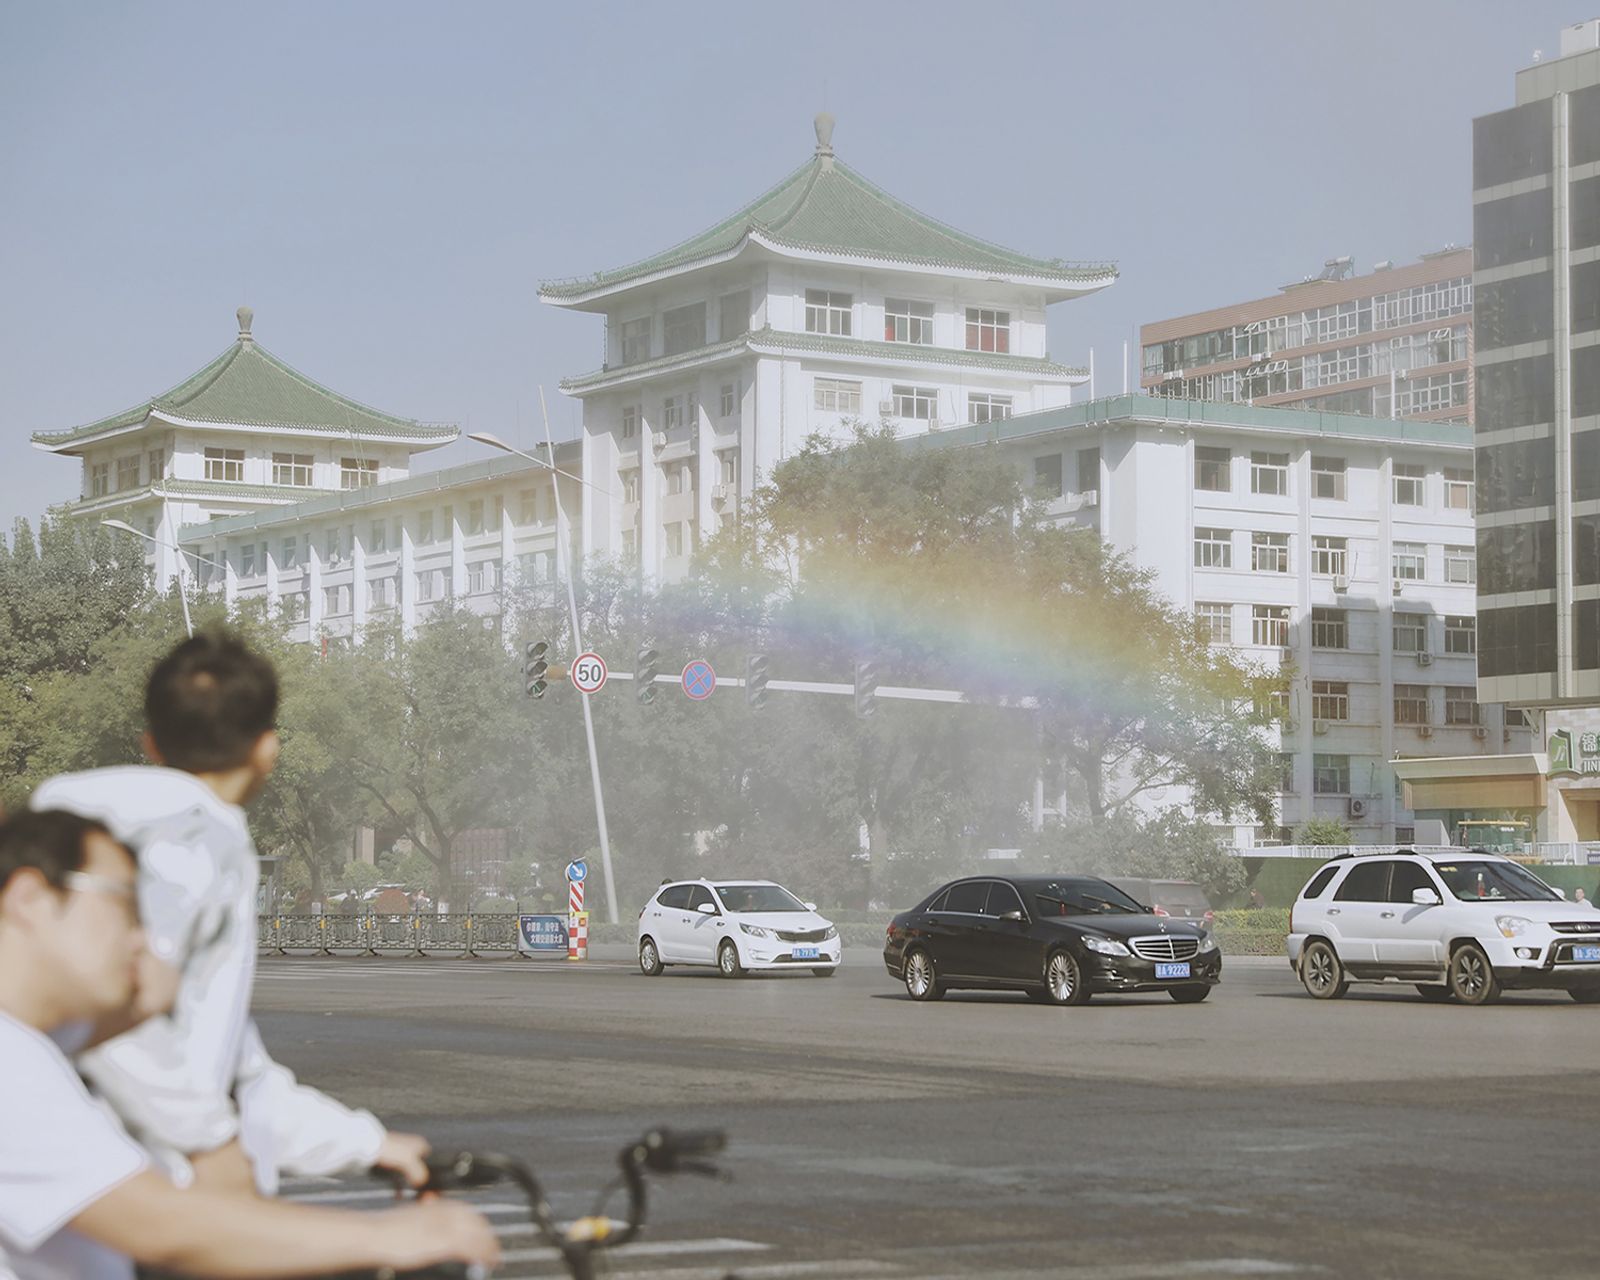 © Lu Wang - Frozen are the winds of time #57 Rainbow in a street